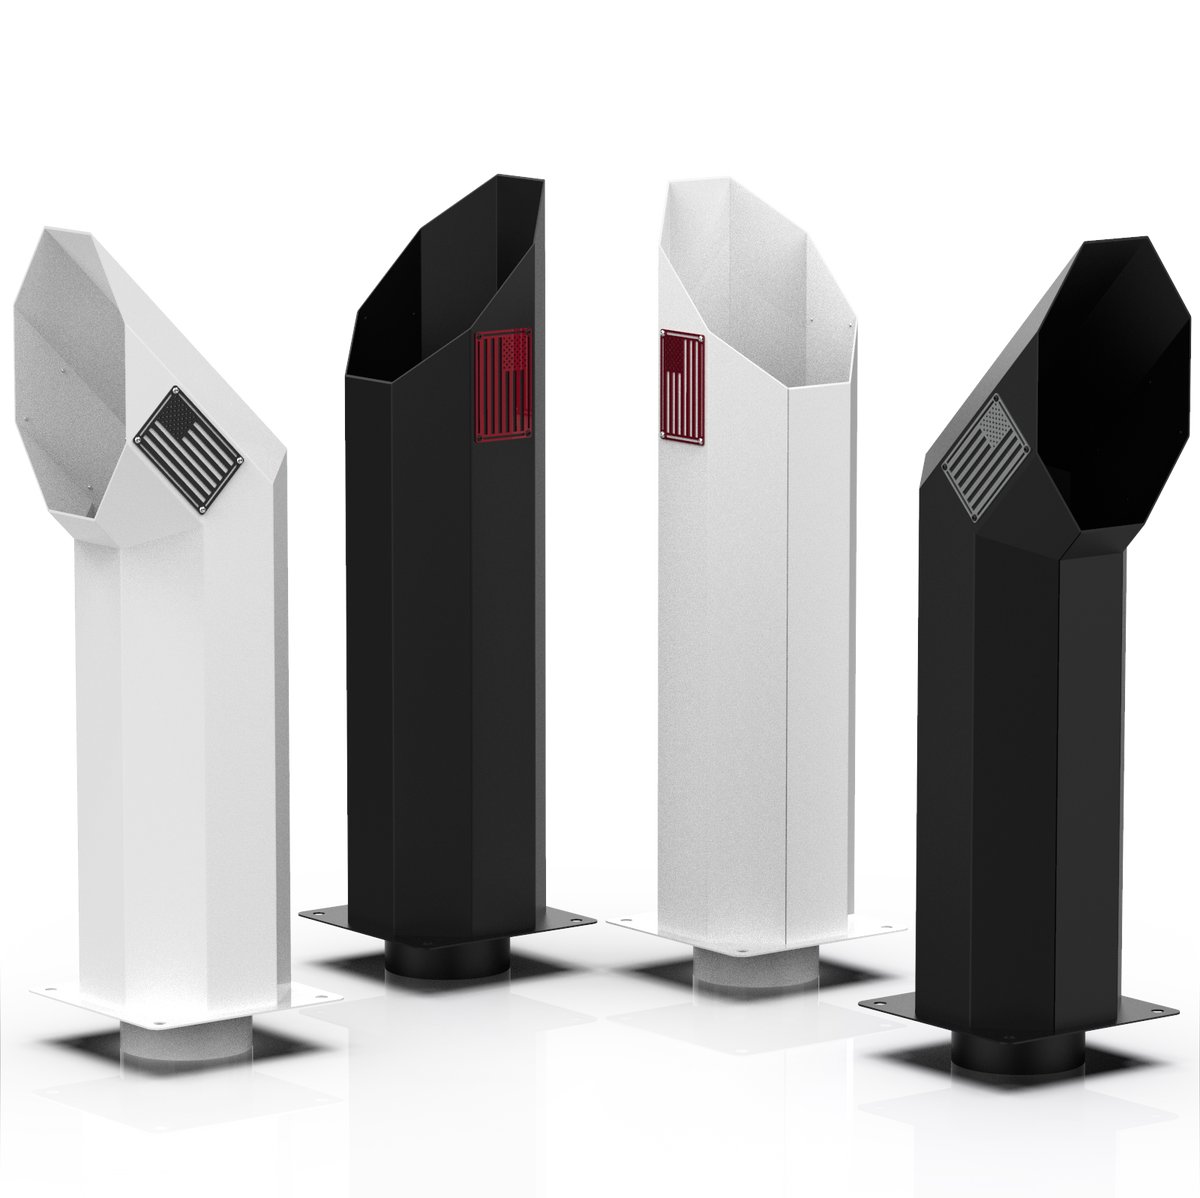 4 Octagon Exhaust Stacks in Black and White with American Flag Logo